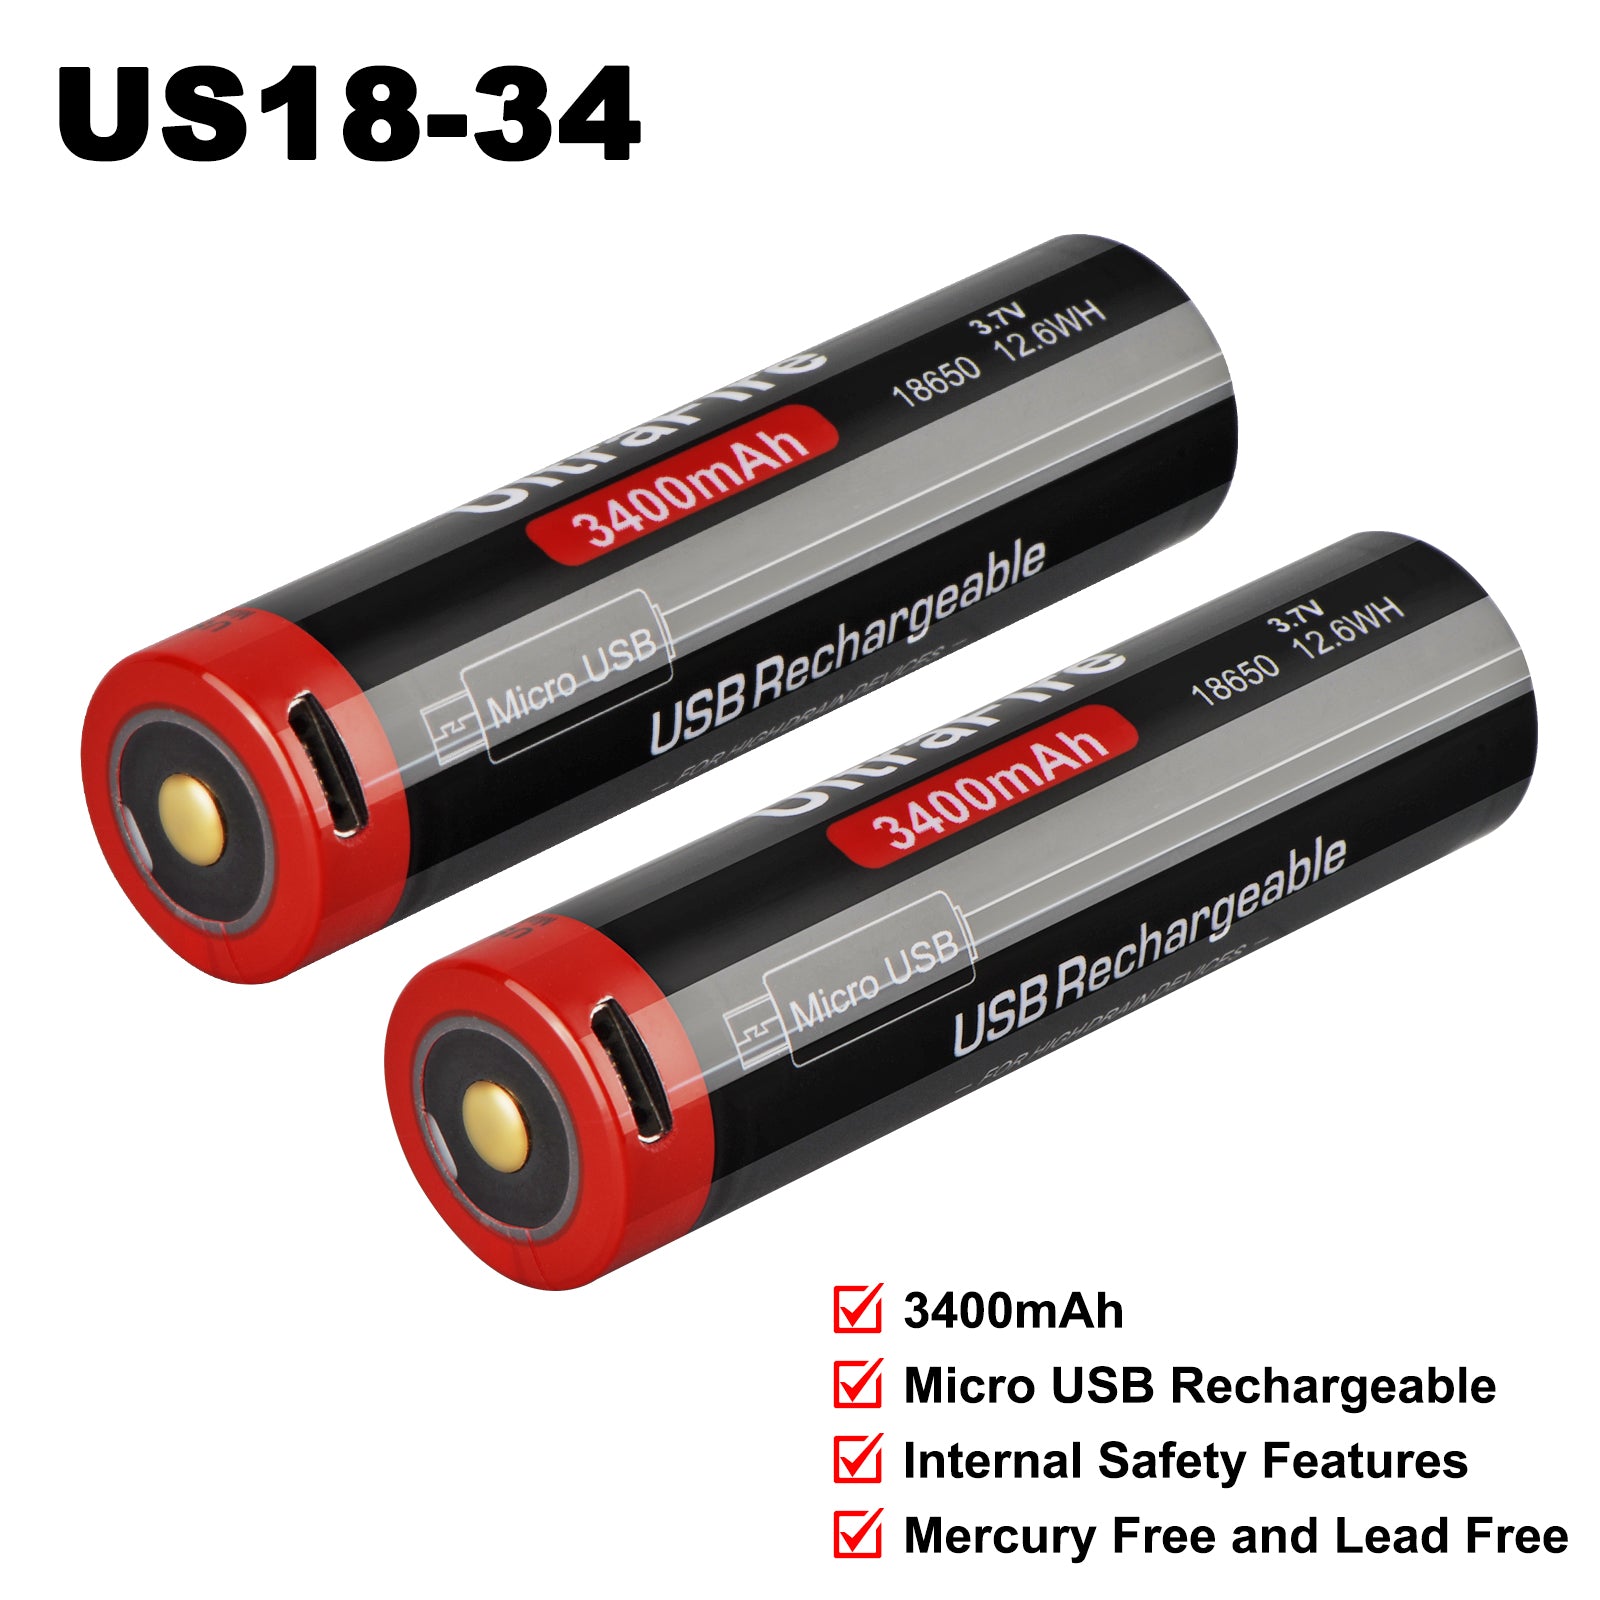 UltraFire 3400mAh 3.7V 18650 USB Rechargeable Lithium Battery with Protection Board (2PCS)